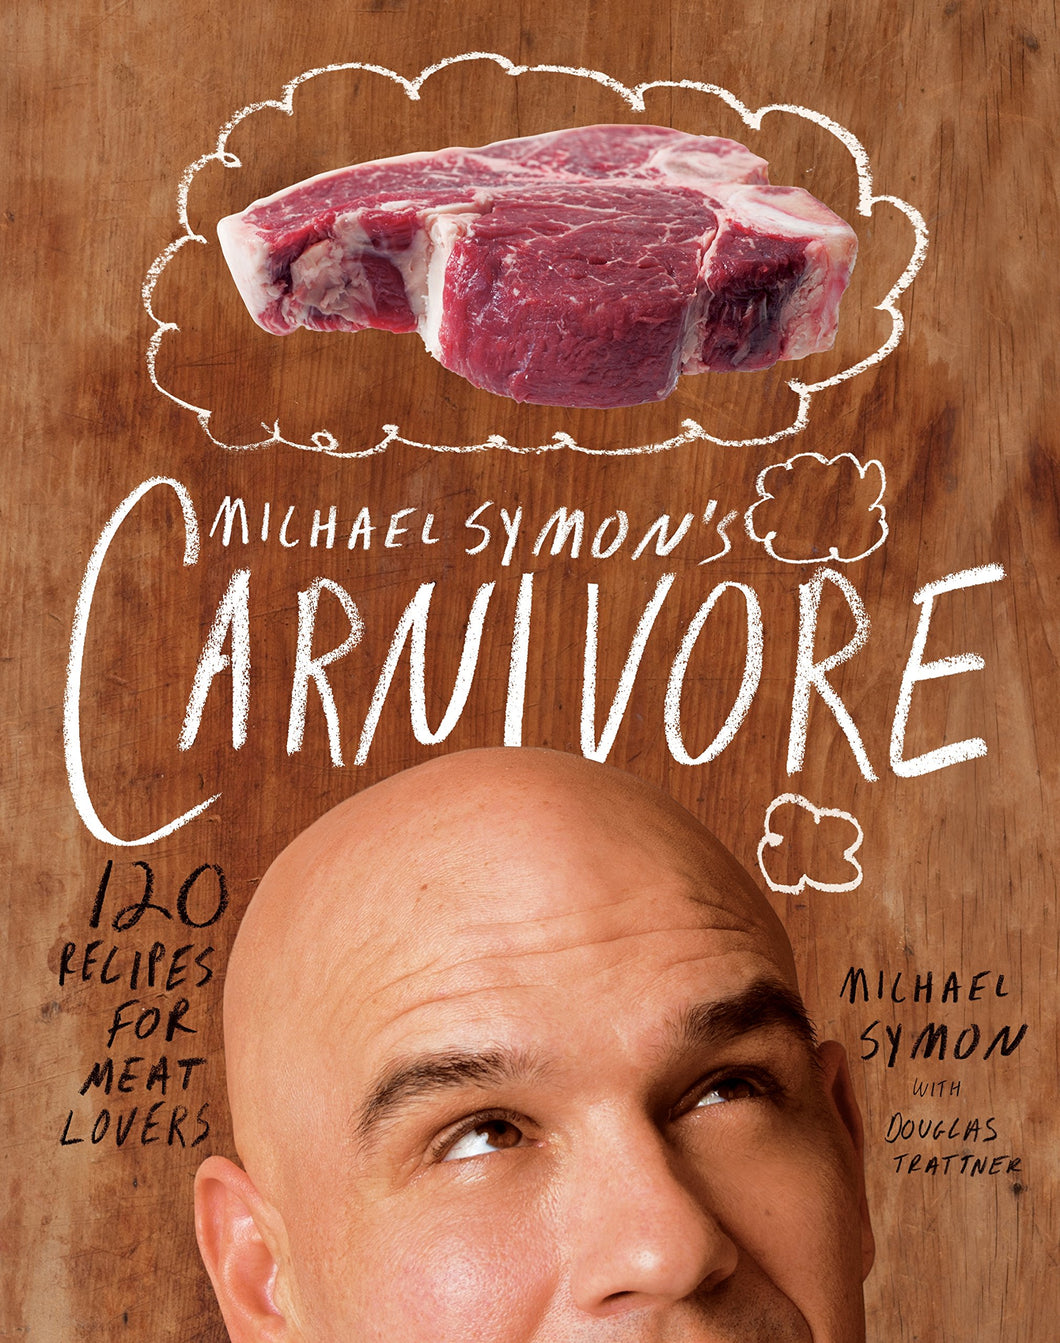 Michael Symon's Carnivore (120 Recipes for Meat Lovers) by Michael Symon